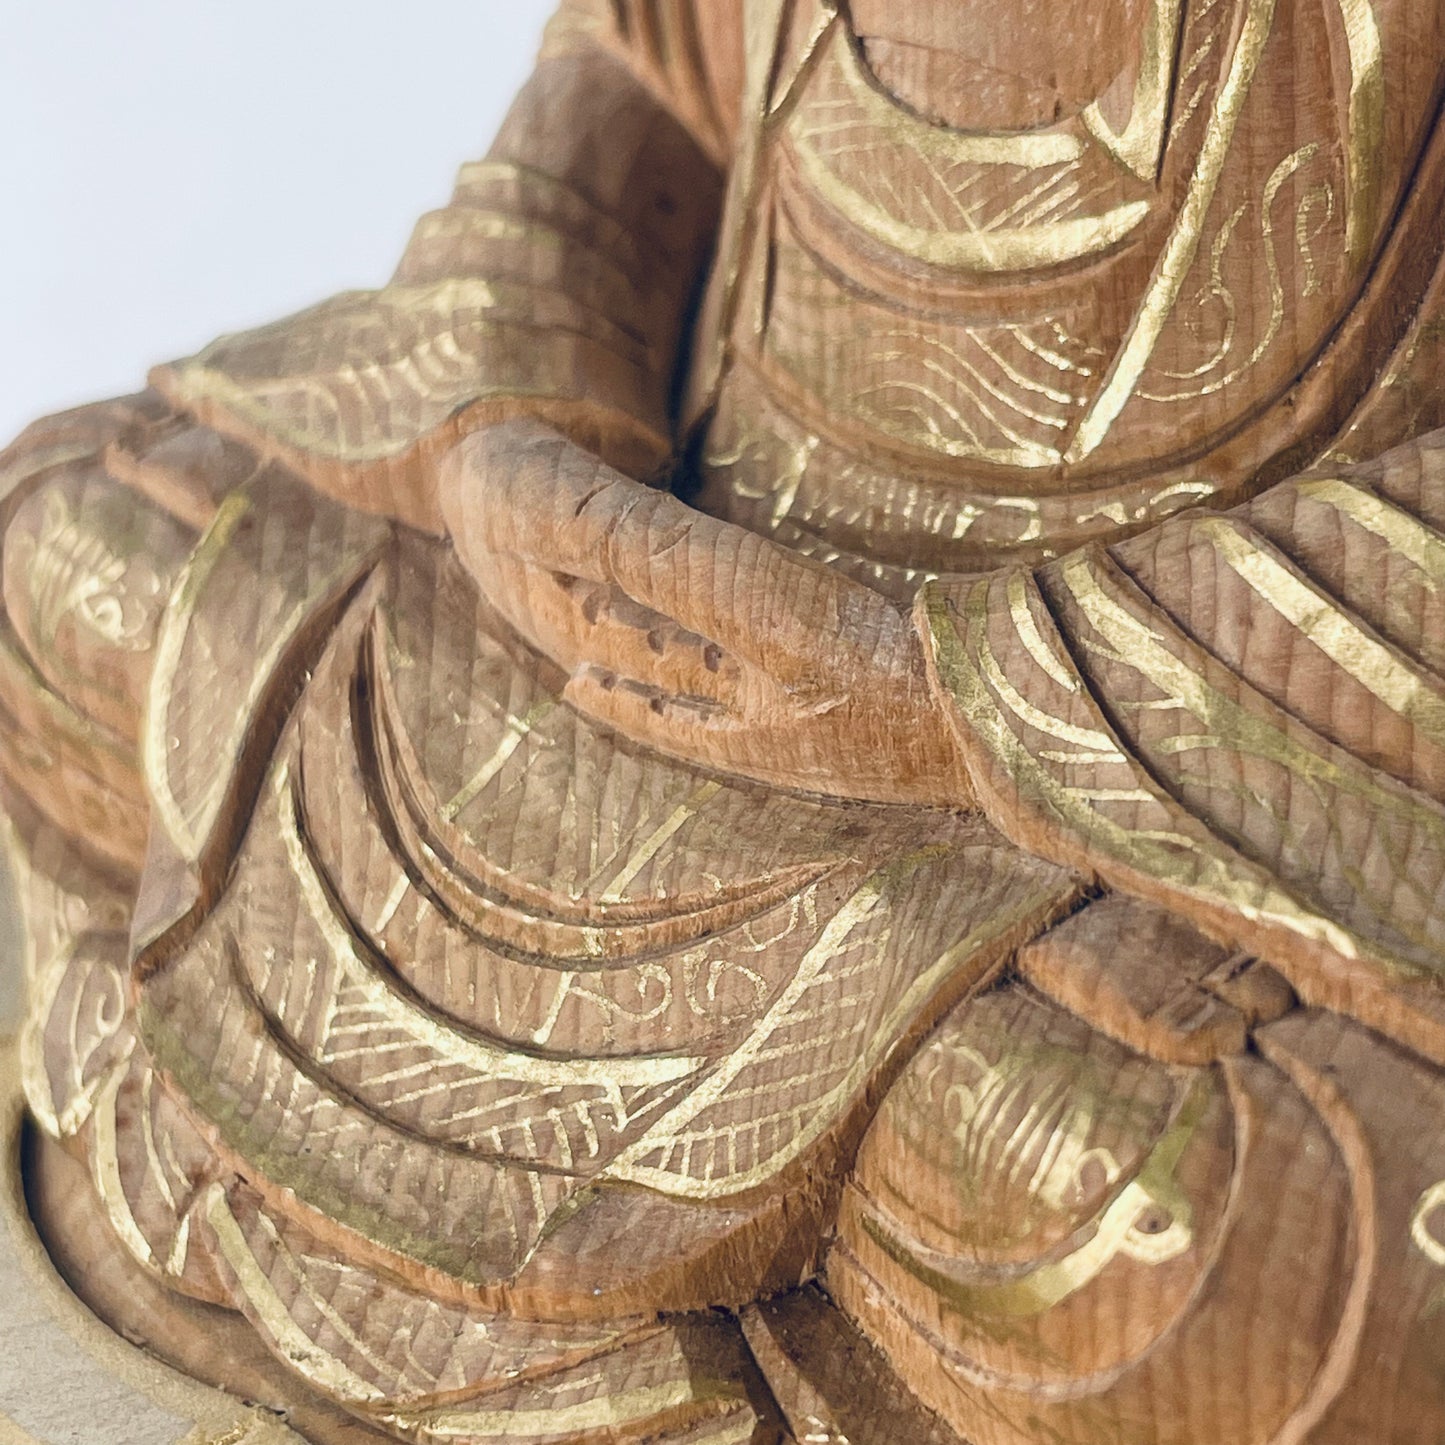 Statue of The Buddha in Seated Meditation Carved Wooden Japanese